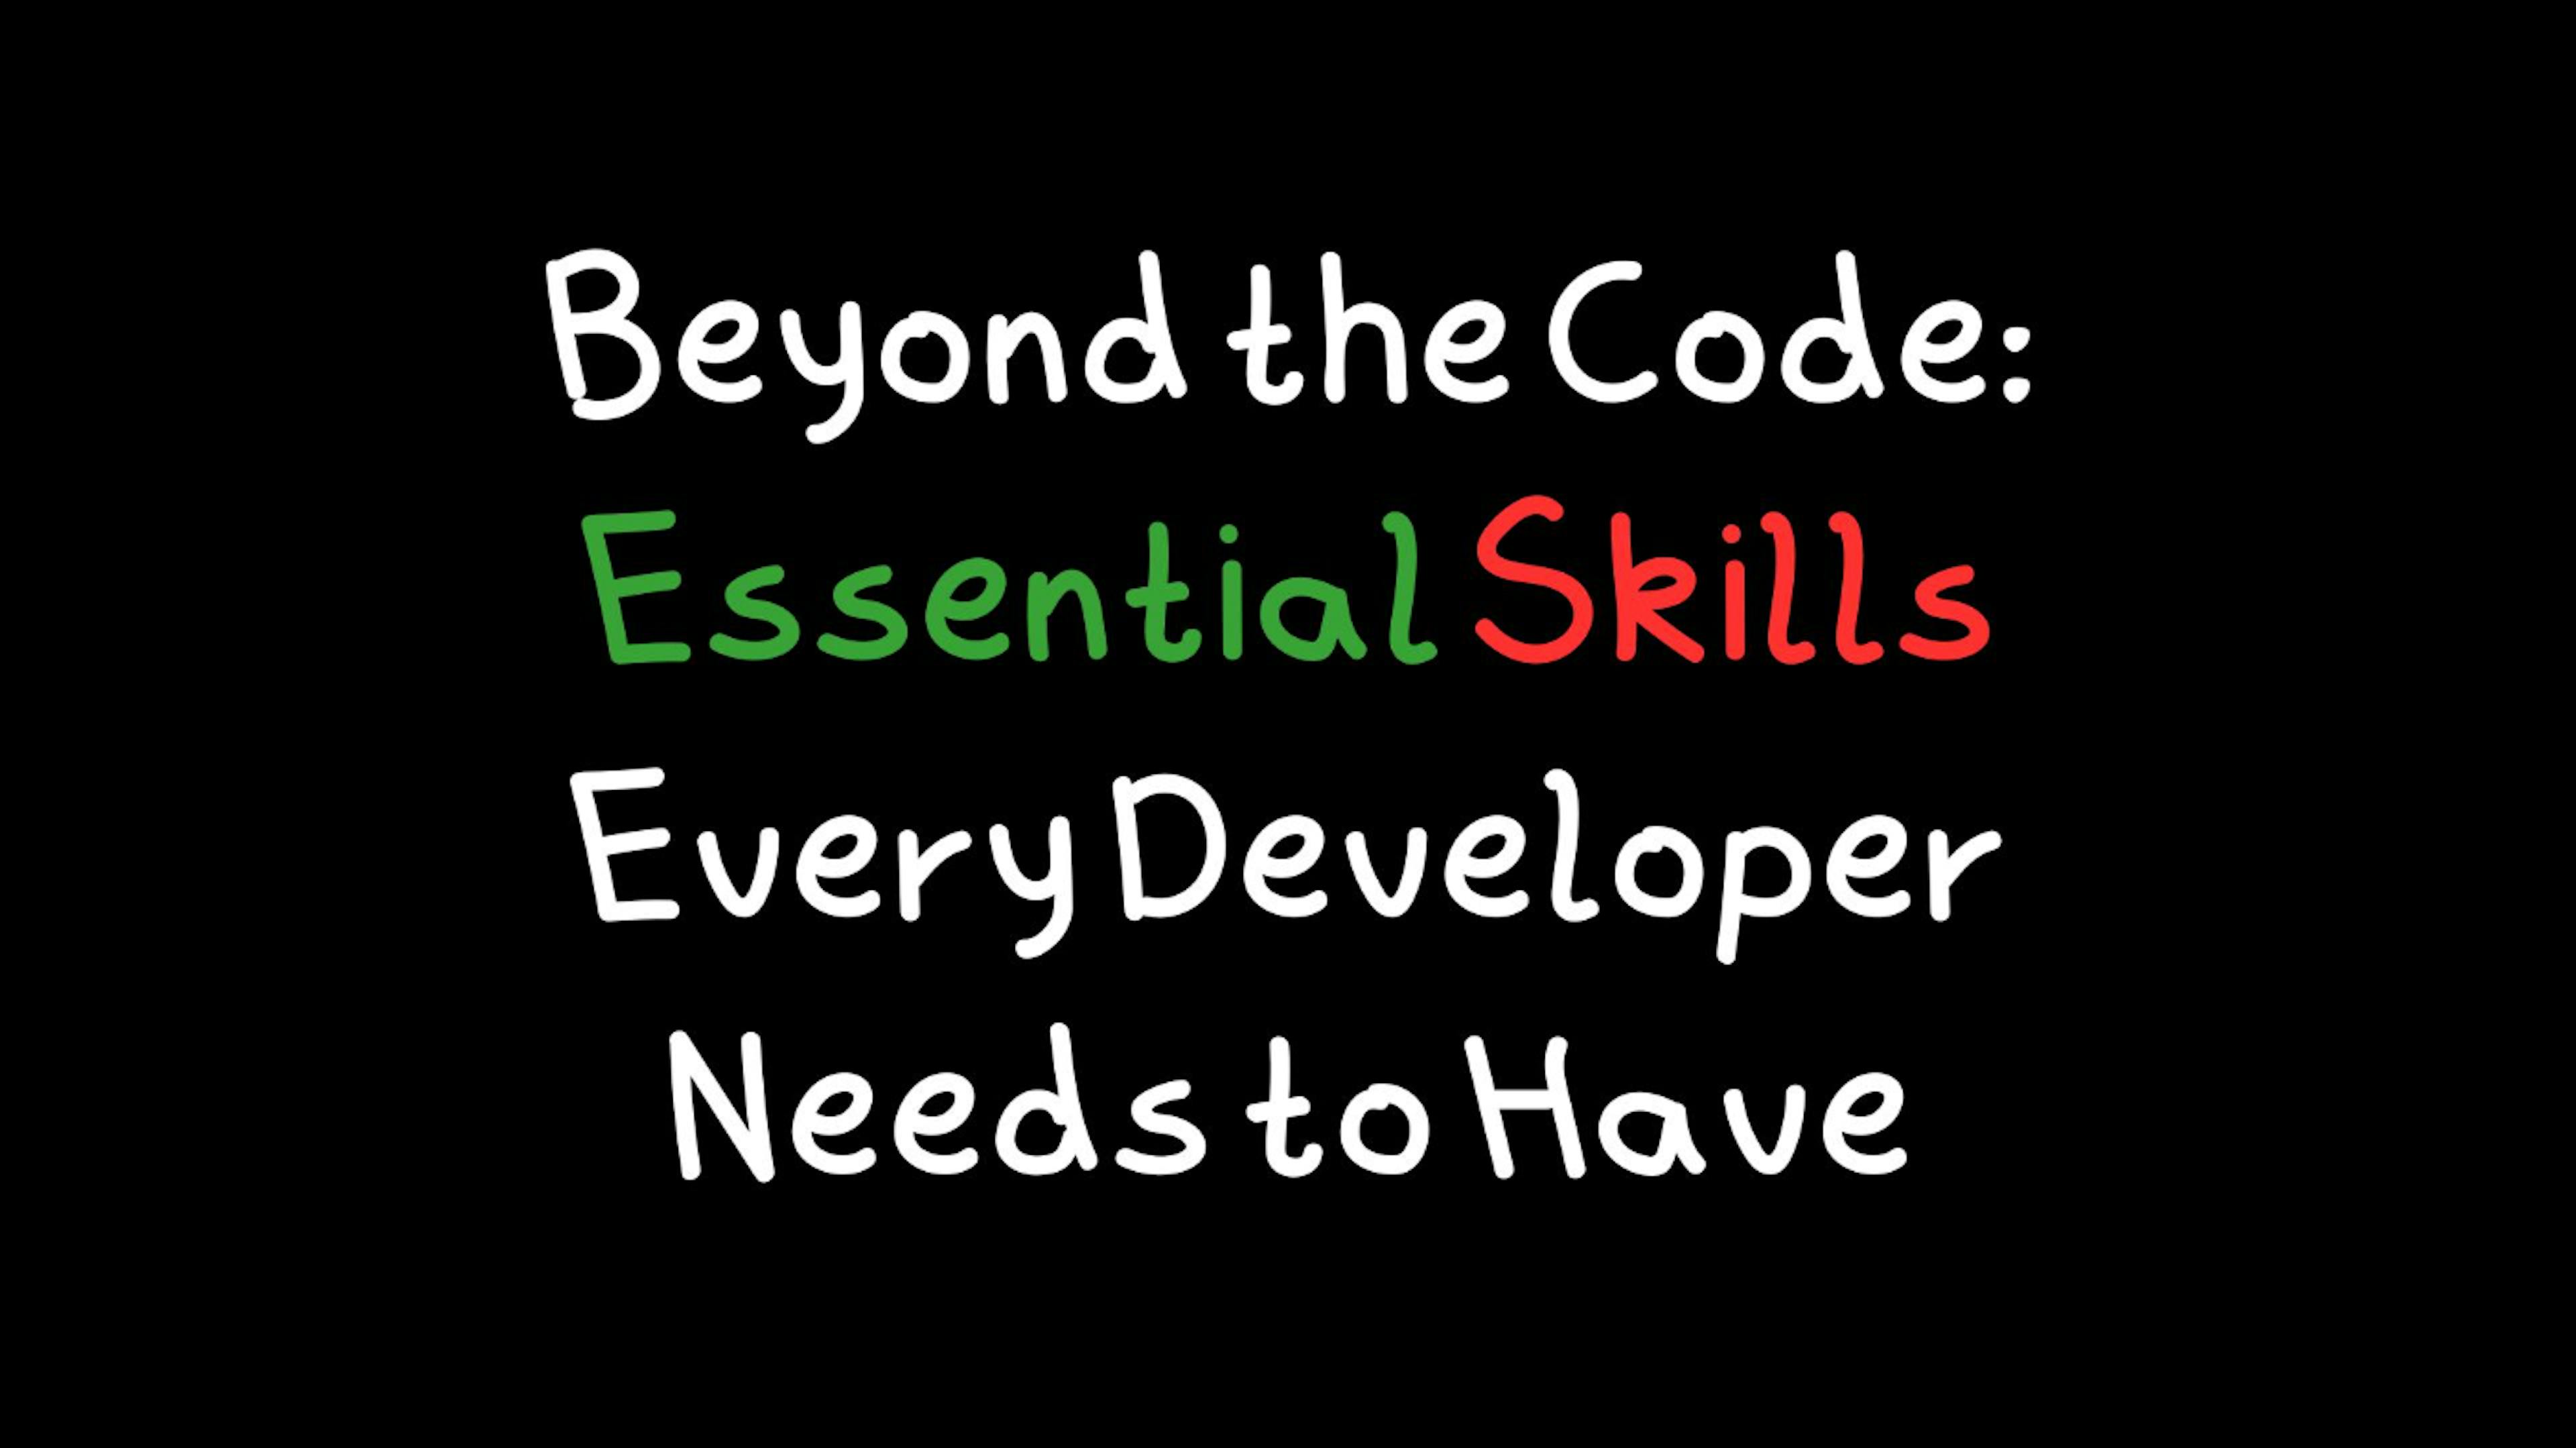 featured image - Beyond the Code: Every Developer Needs These Essential Skills